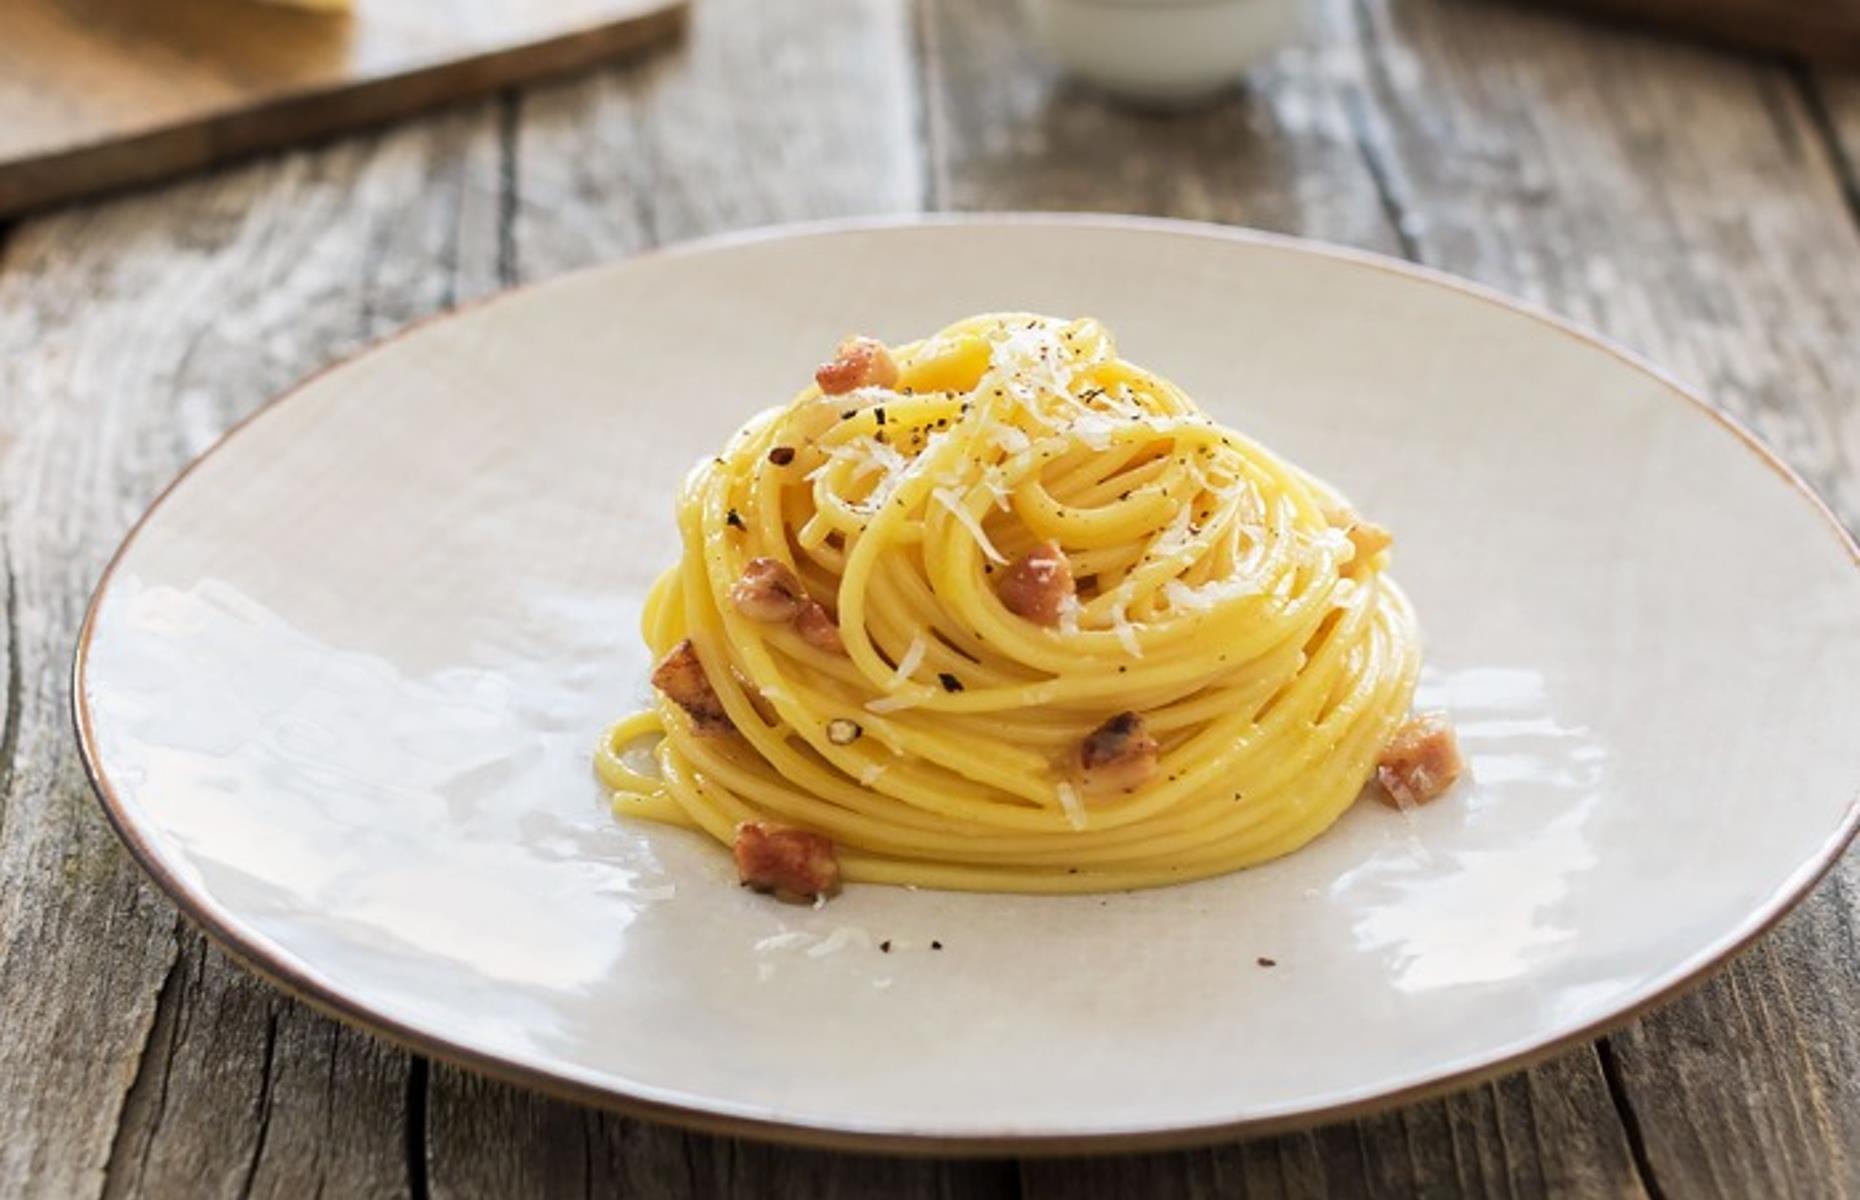 Classic Italian dishes that are super easy to make